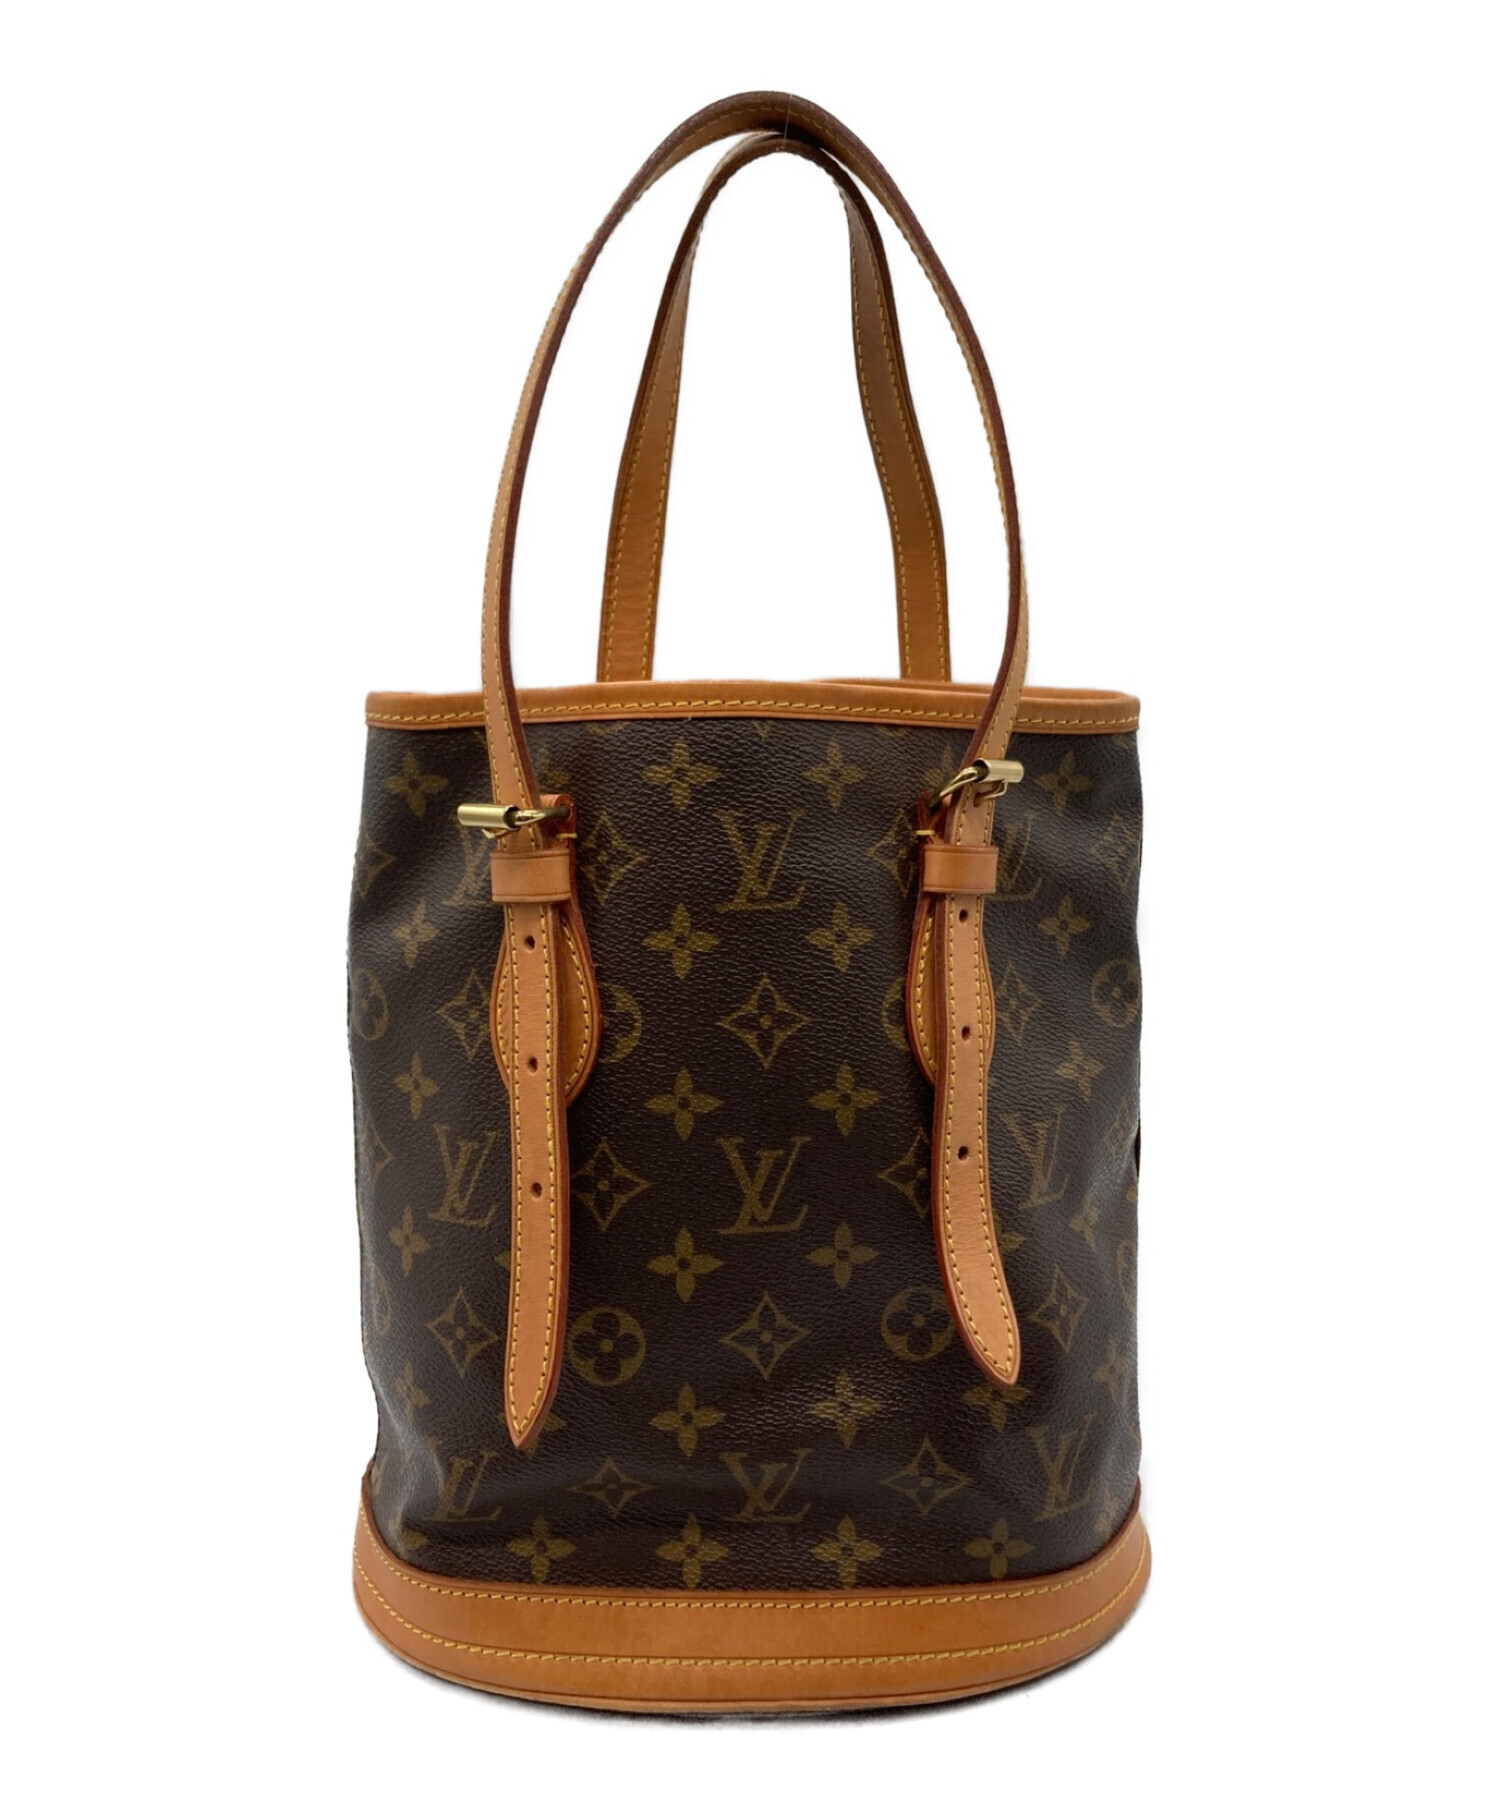 Louis Vuitton ルイヴィトン  バケット トートバッグ